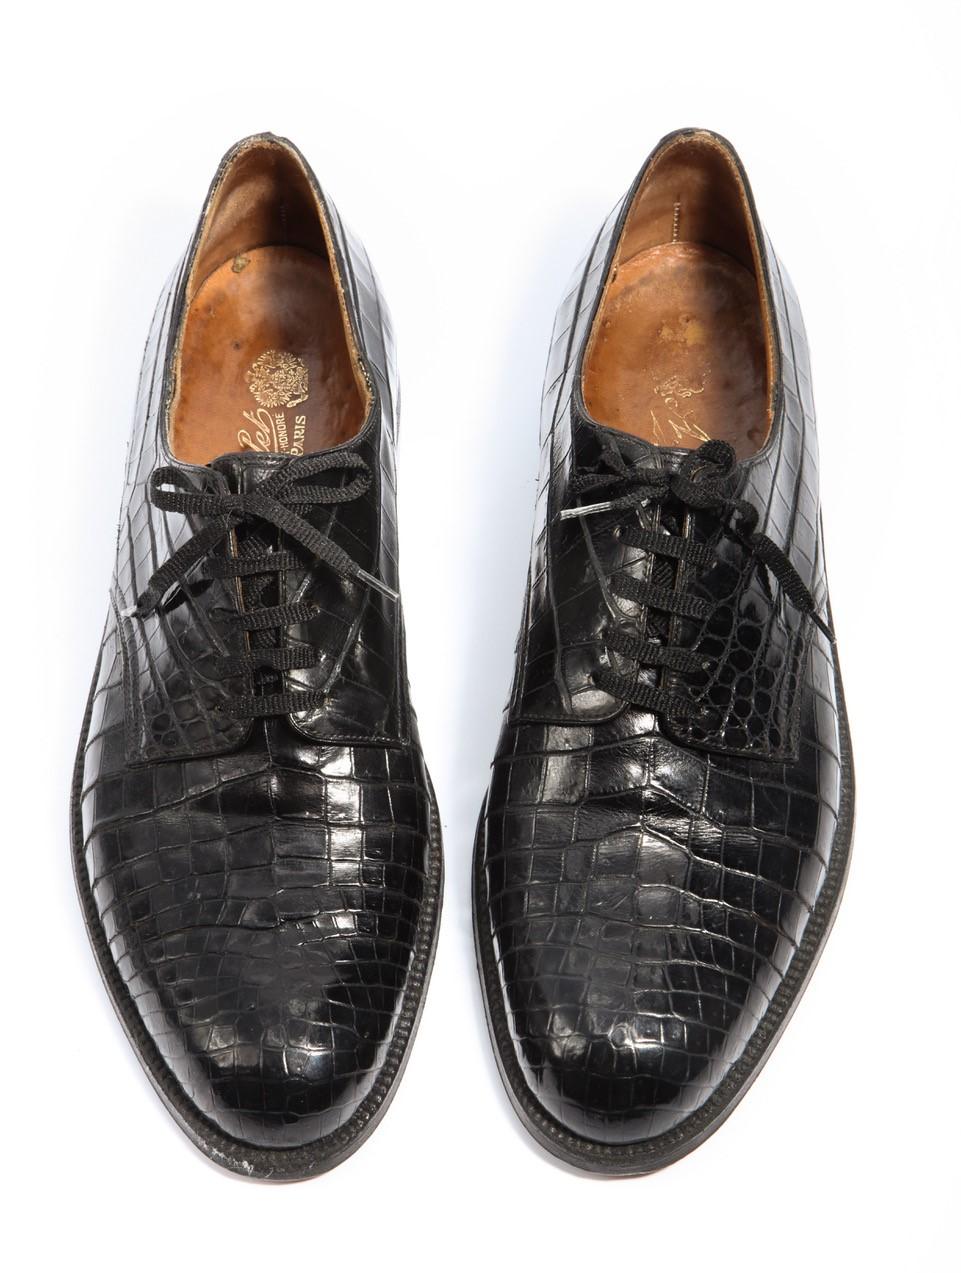 Pair of gentleman's rare and wonderful black crocodile shoes provenance Indian prince made 1920 by A.Gillet Paris gold embossed on interior maker to the Tsar and Kind Edward VII  352, Faubourg St-Honore Paris. The uppers are in excellent condition.